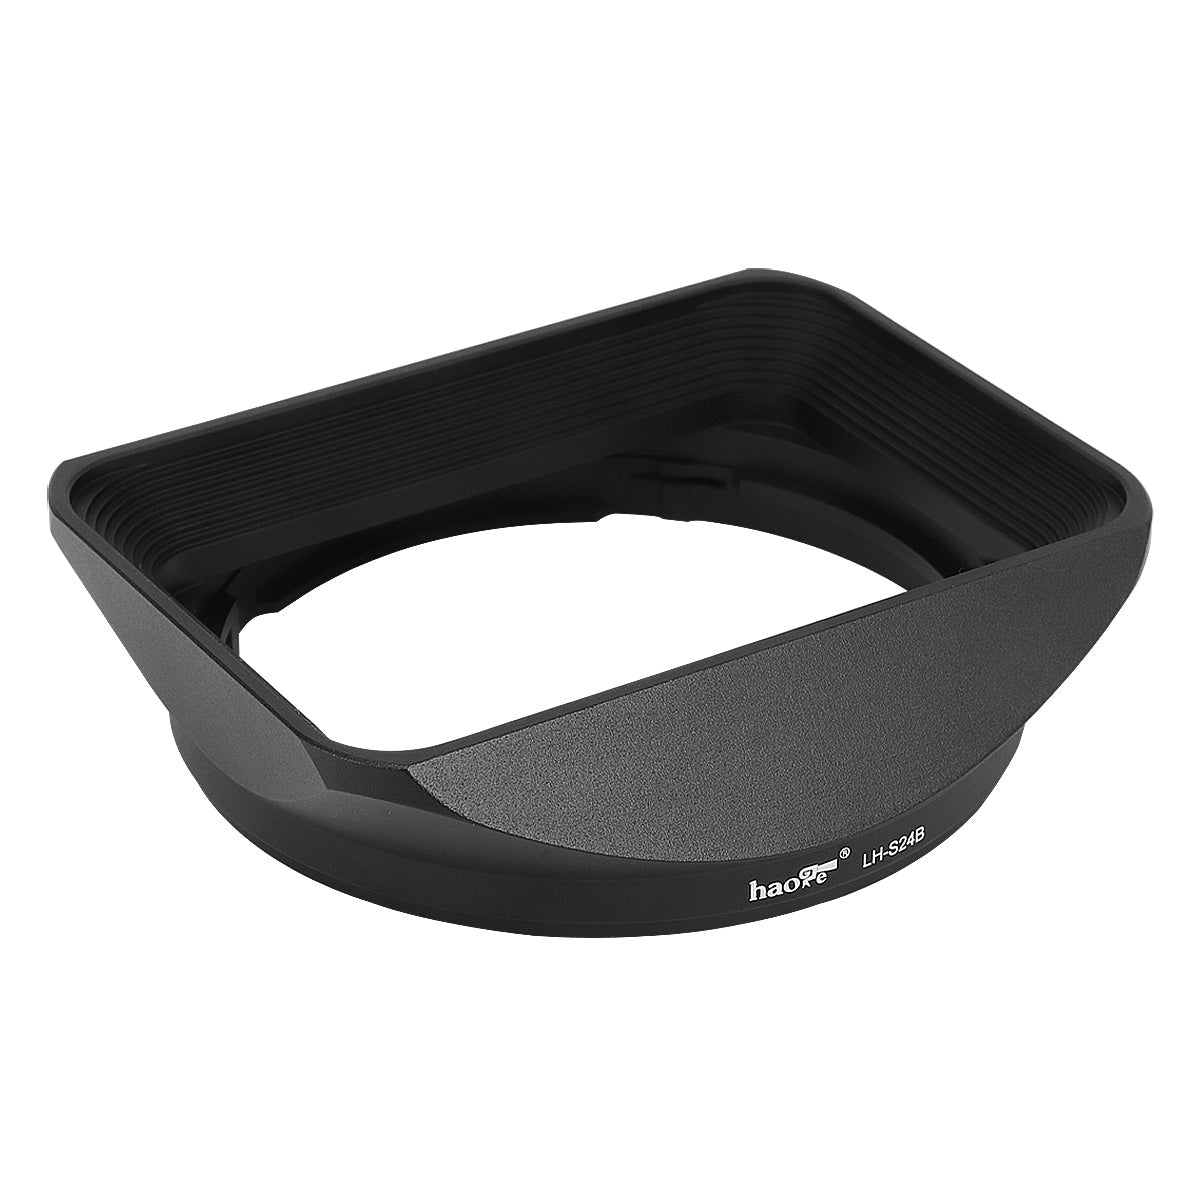 Haoge LH-S24B Bayonet Square Metal Lens Hood Shade with Cap for Sony FE 24mm F1.4 GM SEL24F14GM Wide Angle Prime Lens